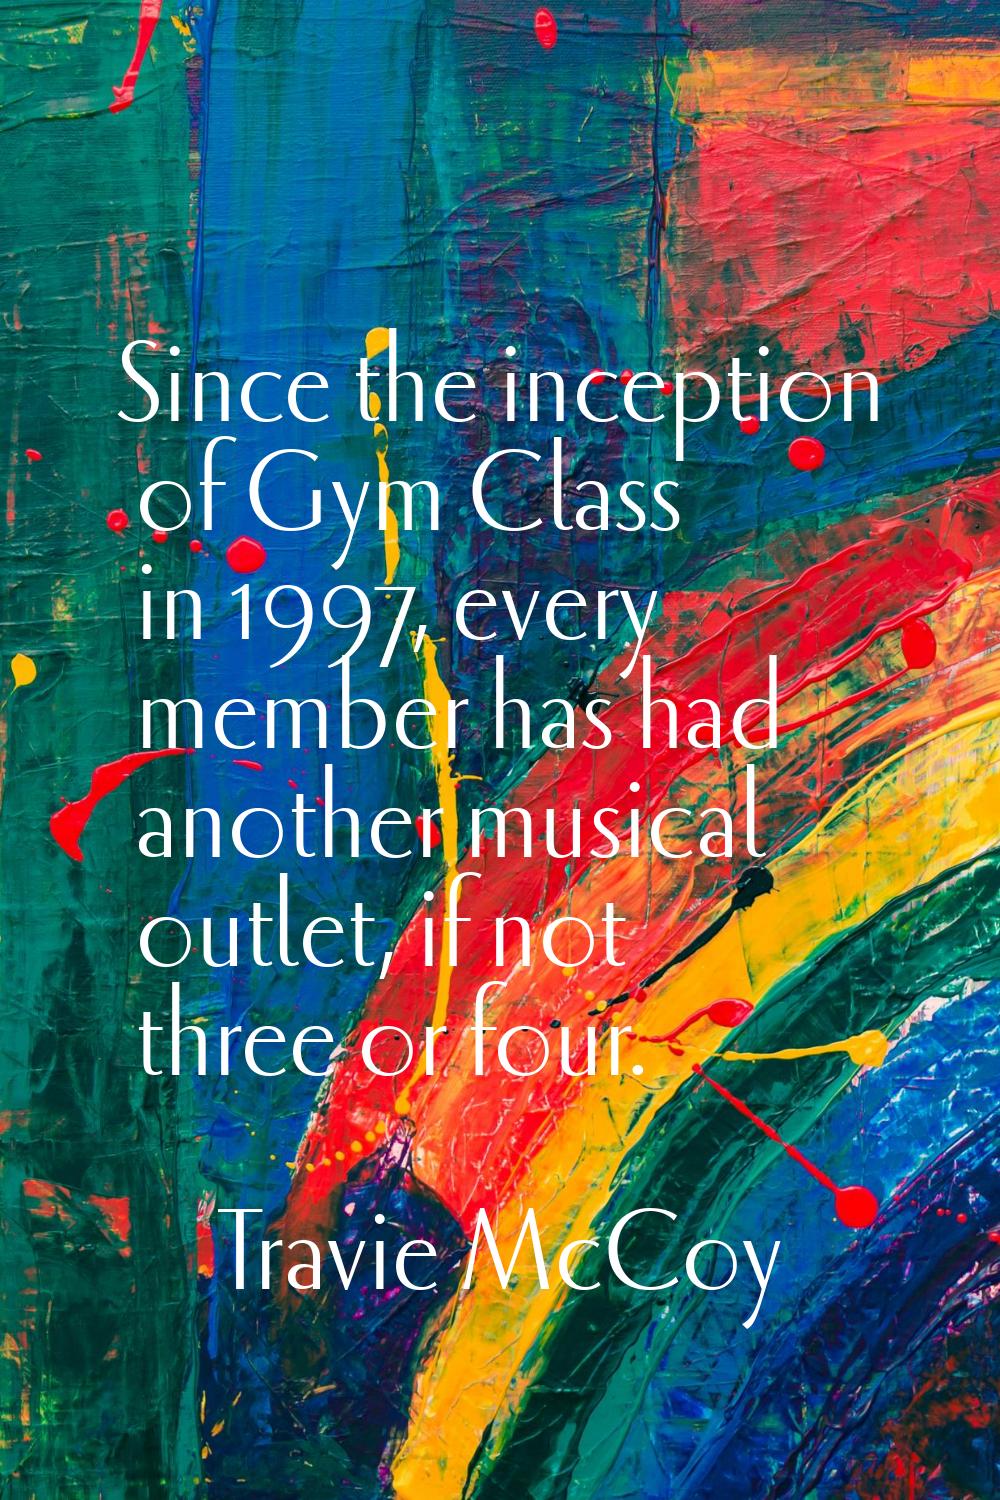 Since the inception of Gym Class in 1997, every member has had another musical outlet, if not three